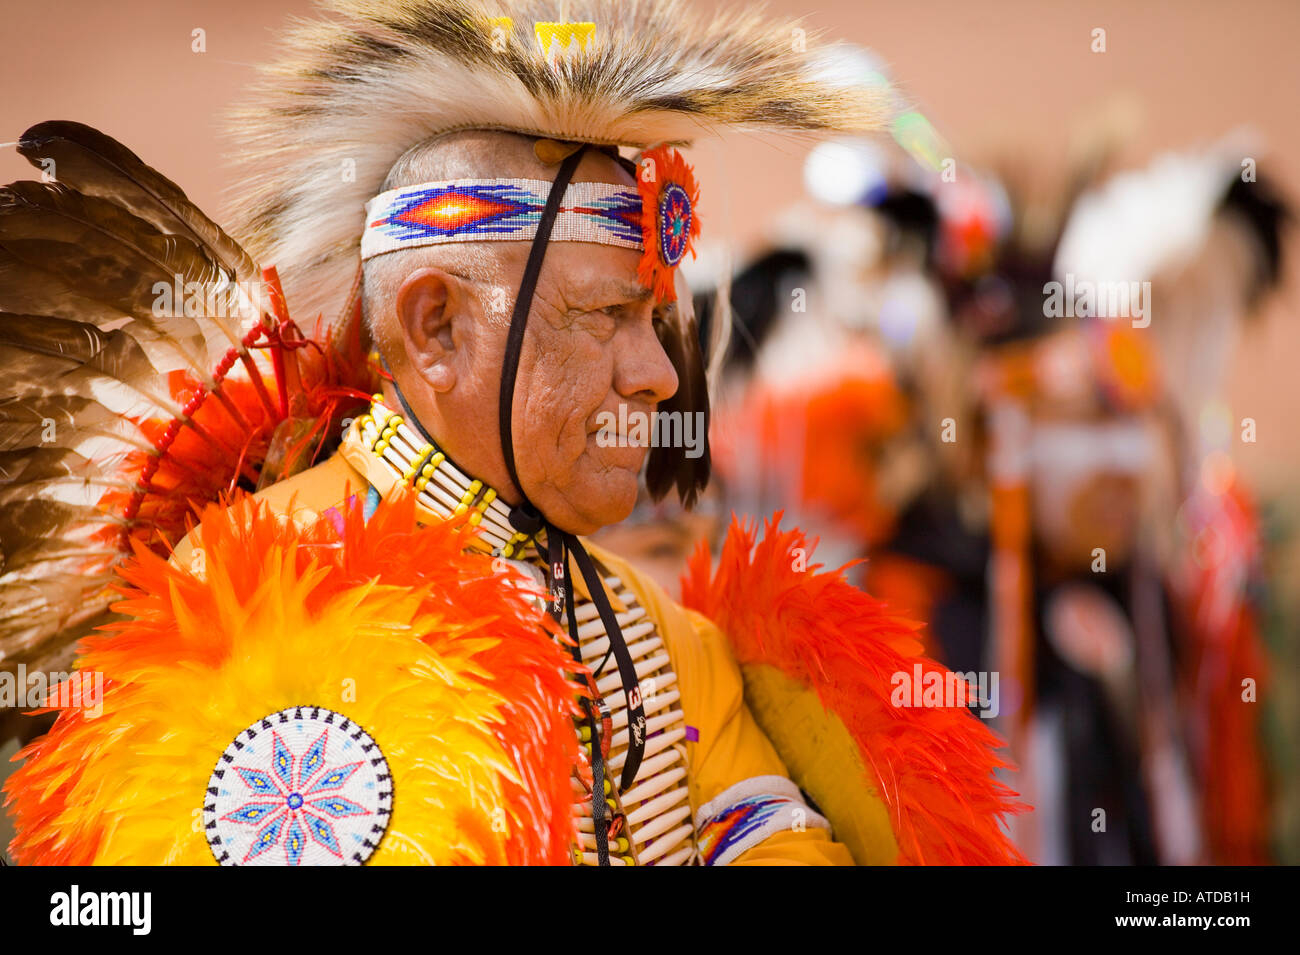 Comanche Indian Fancy Dancers Gallup Inter Tribal Indian Ceremonial Gallup New Mexico Stock Photo